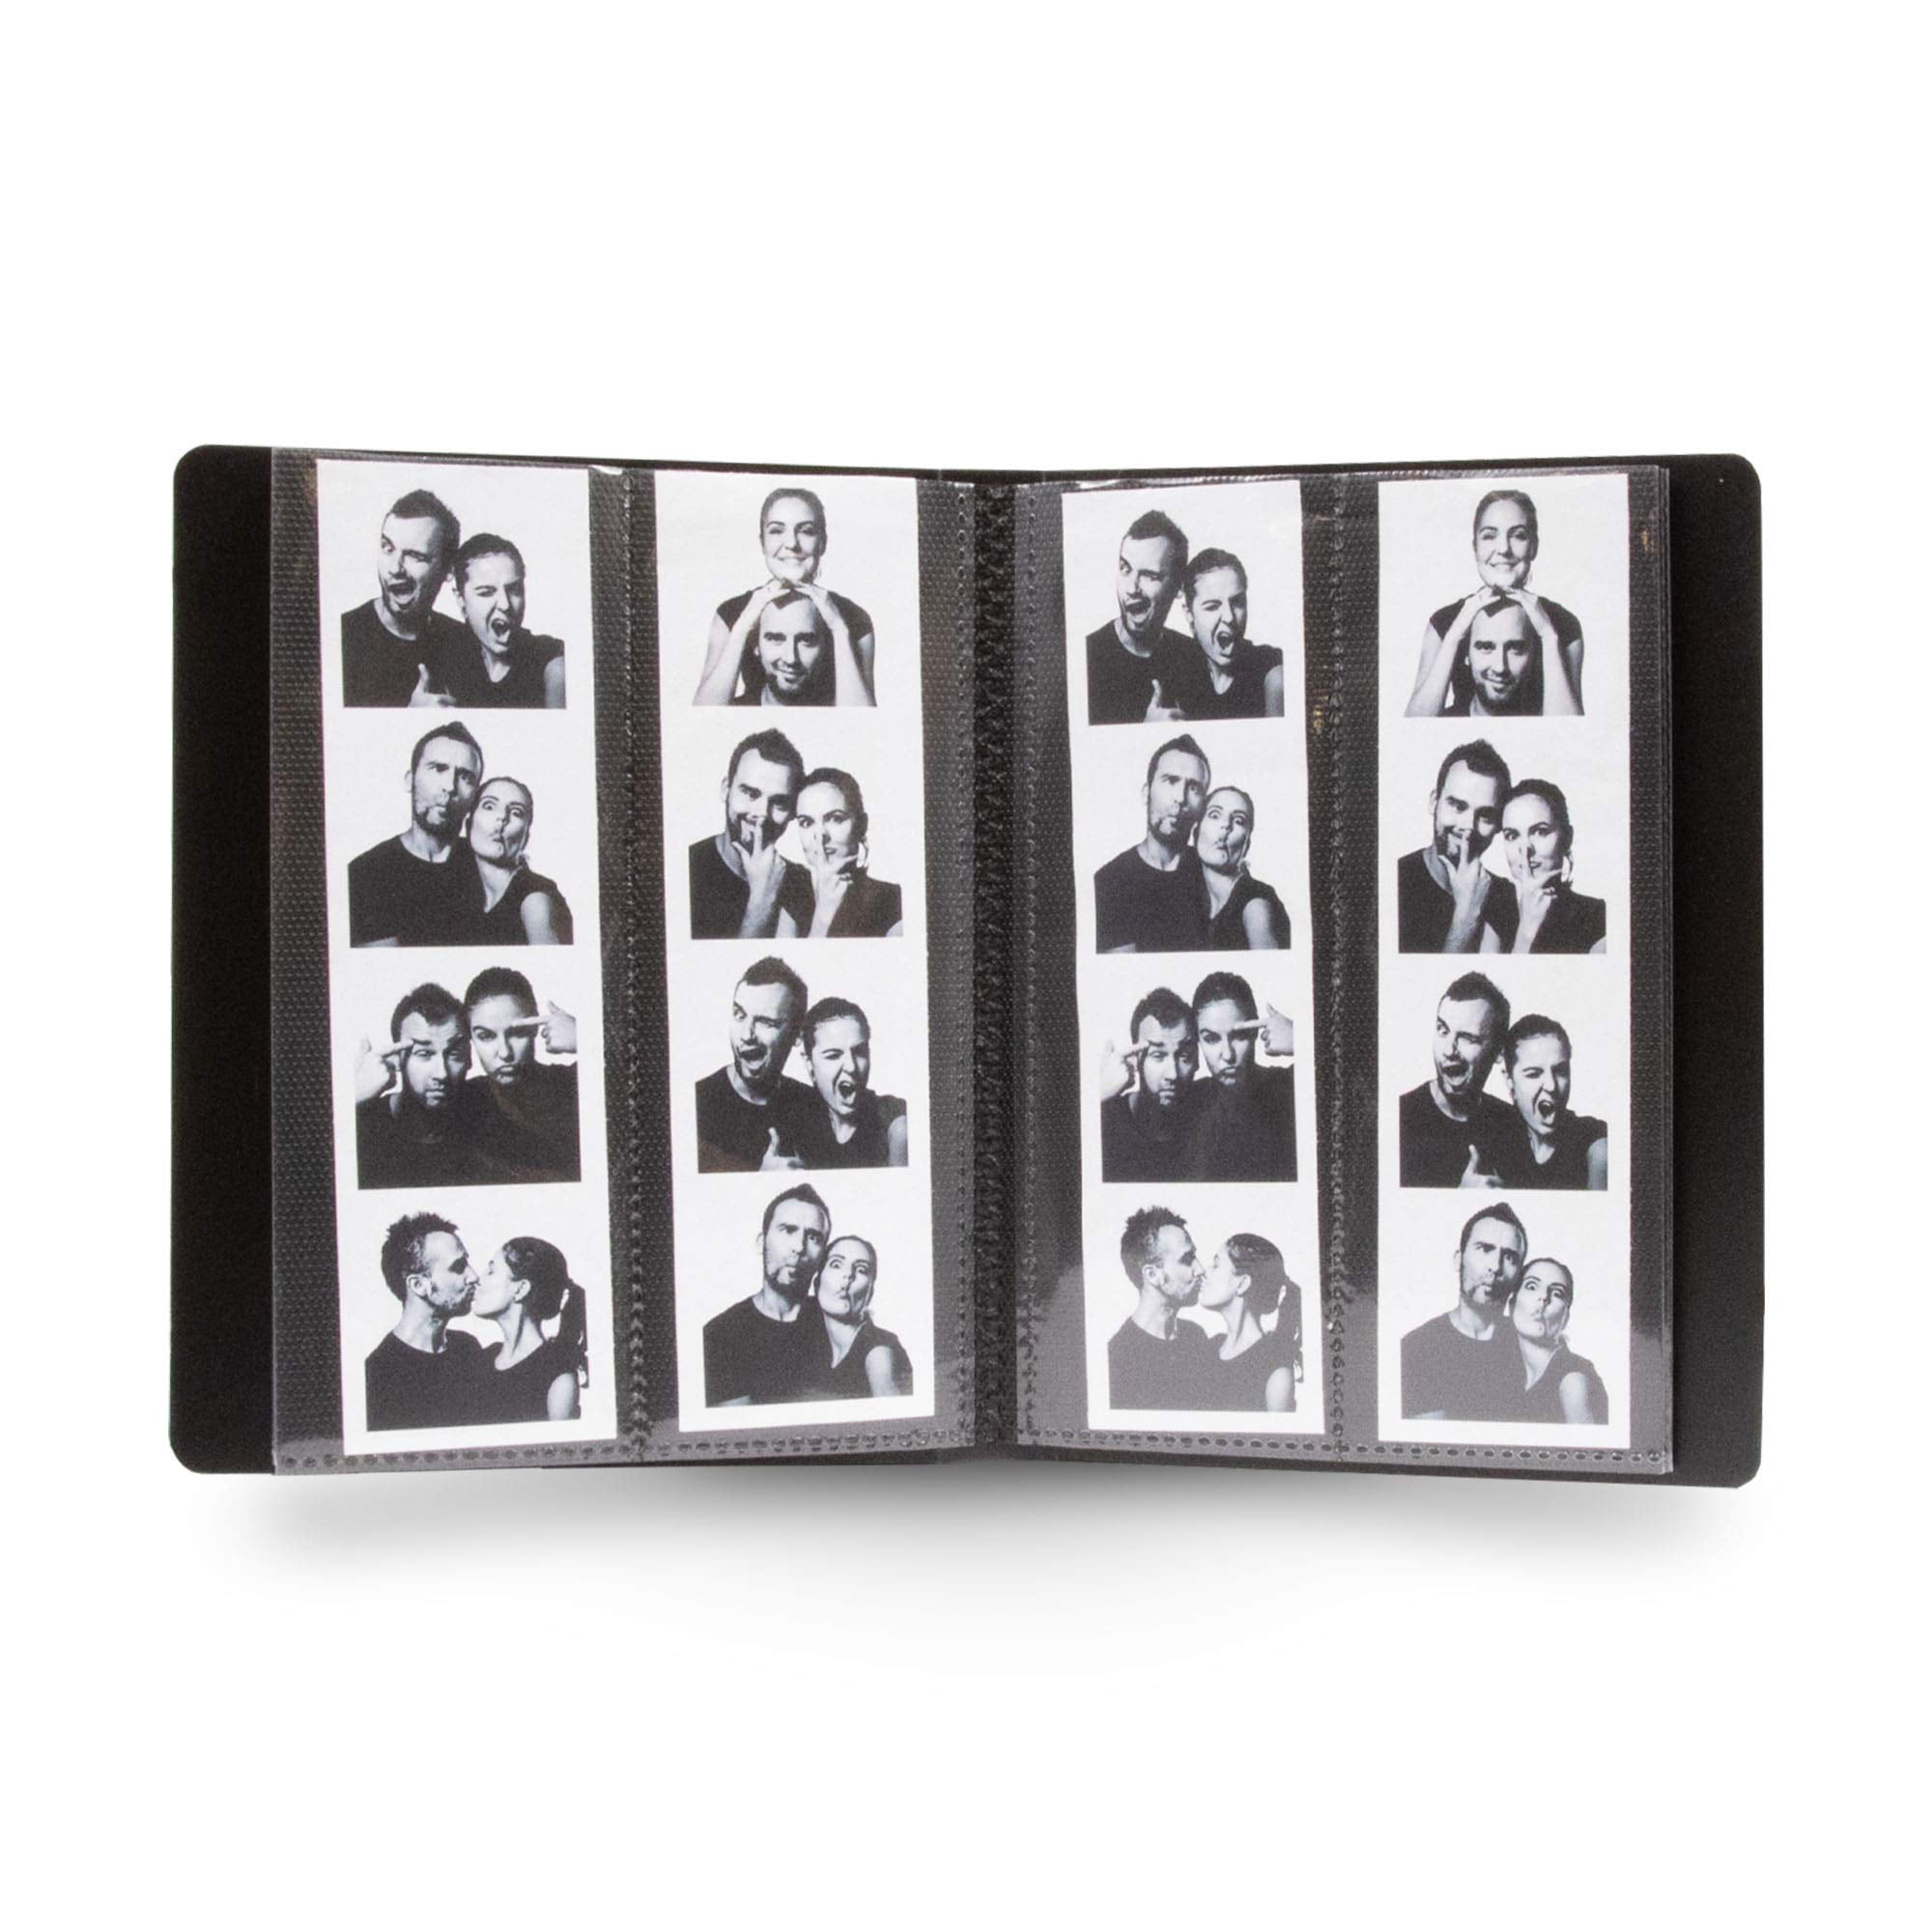 Photo Booth Album Slide in pages 2x6 inch photo booth scrapbook 